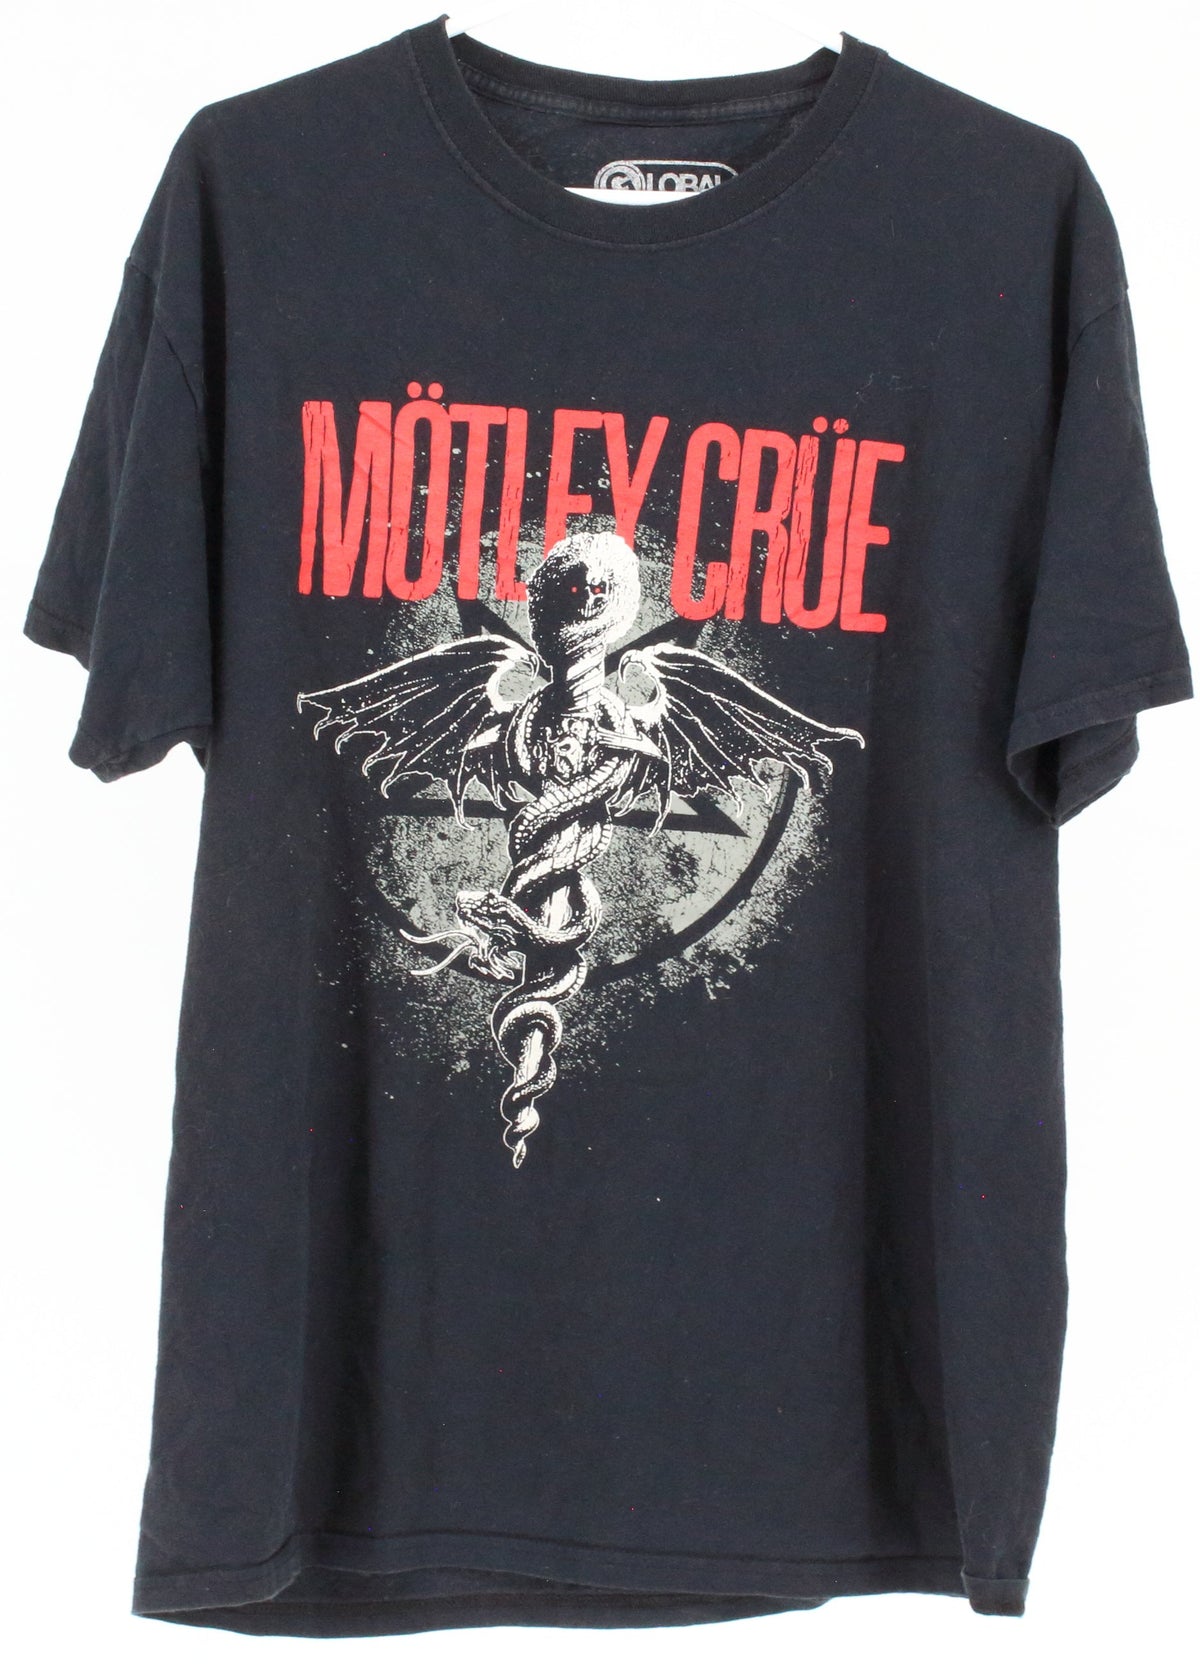 Global Black Motley Crue Front Graphic Band Tee